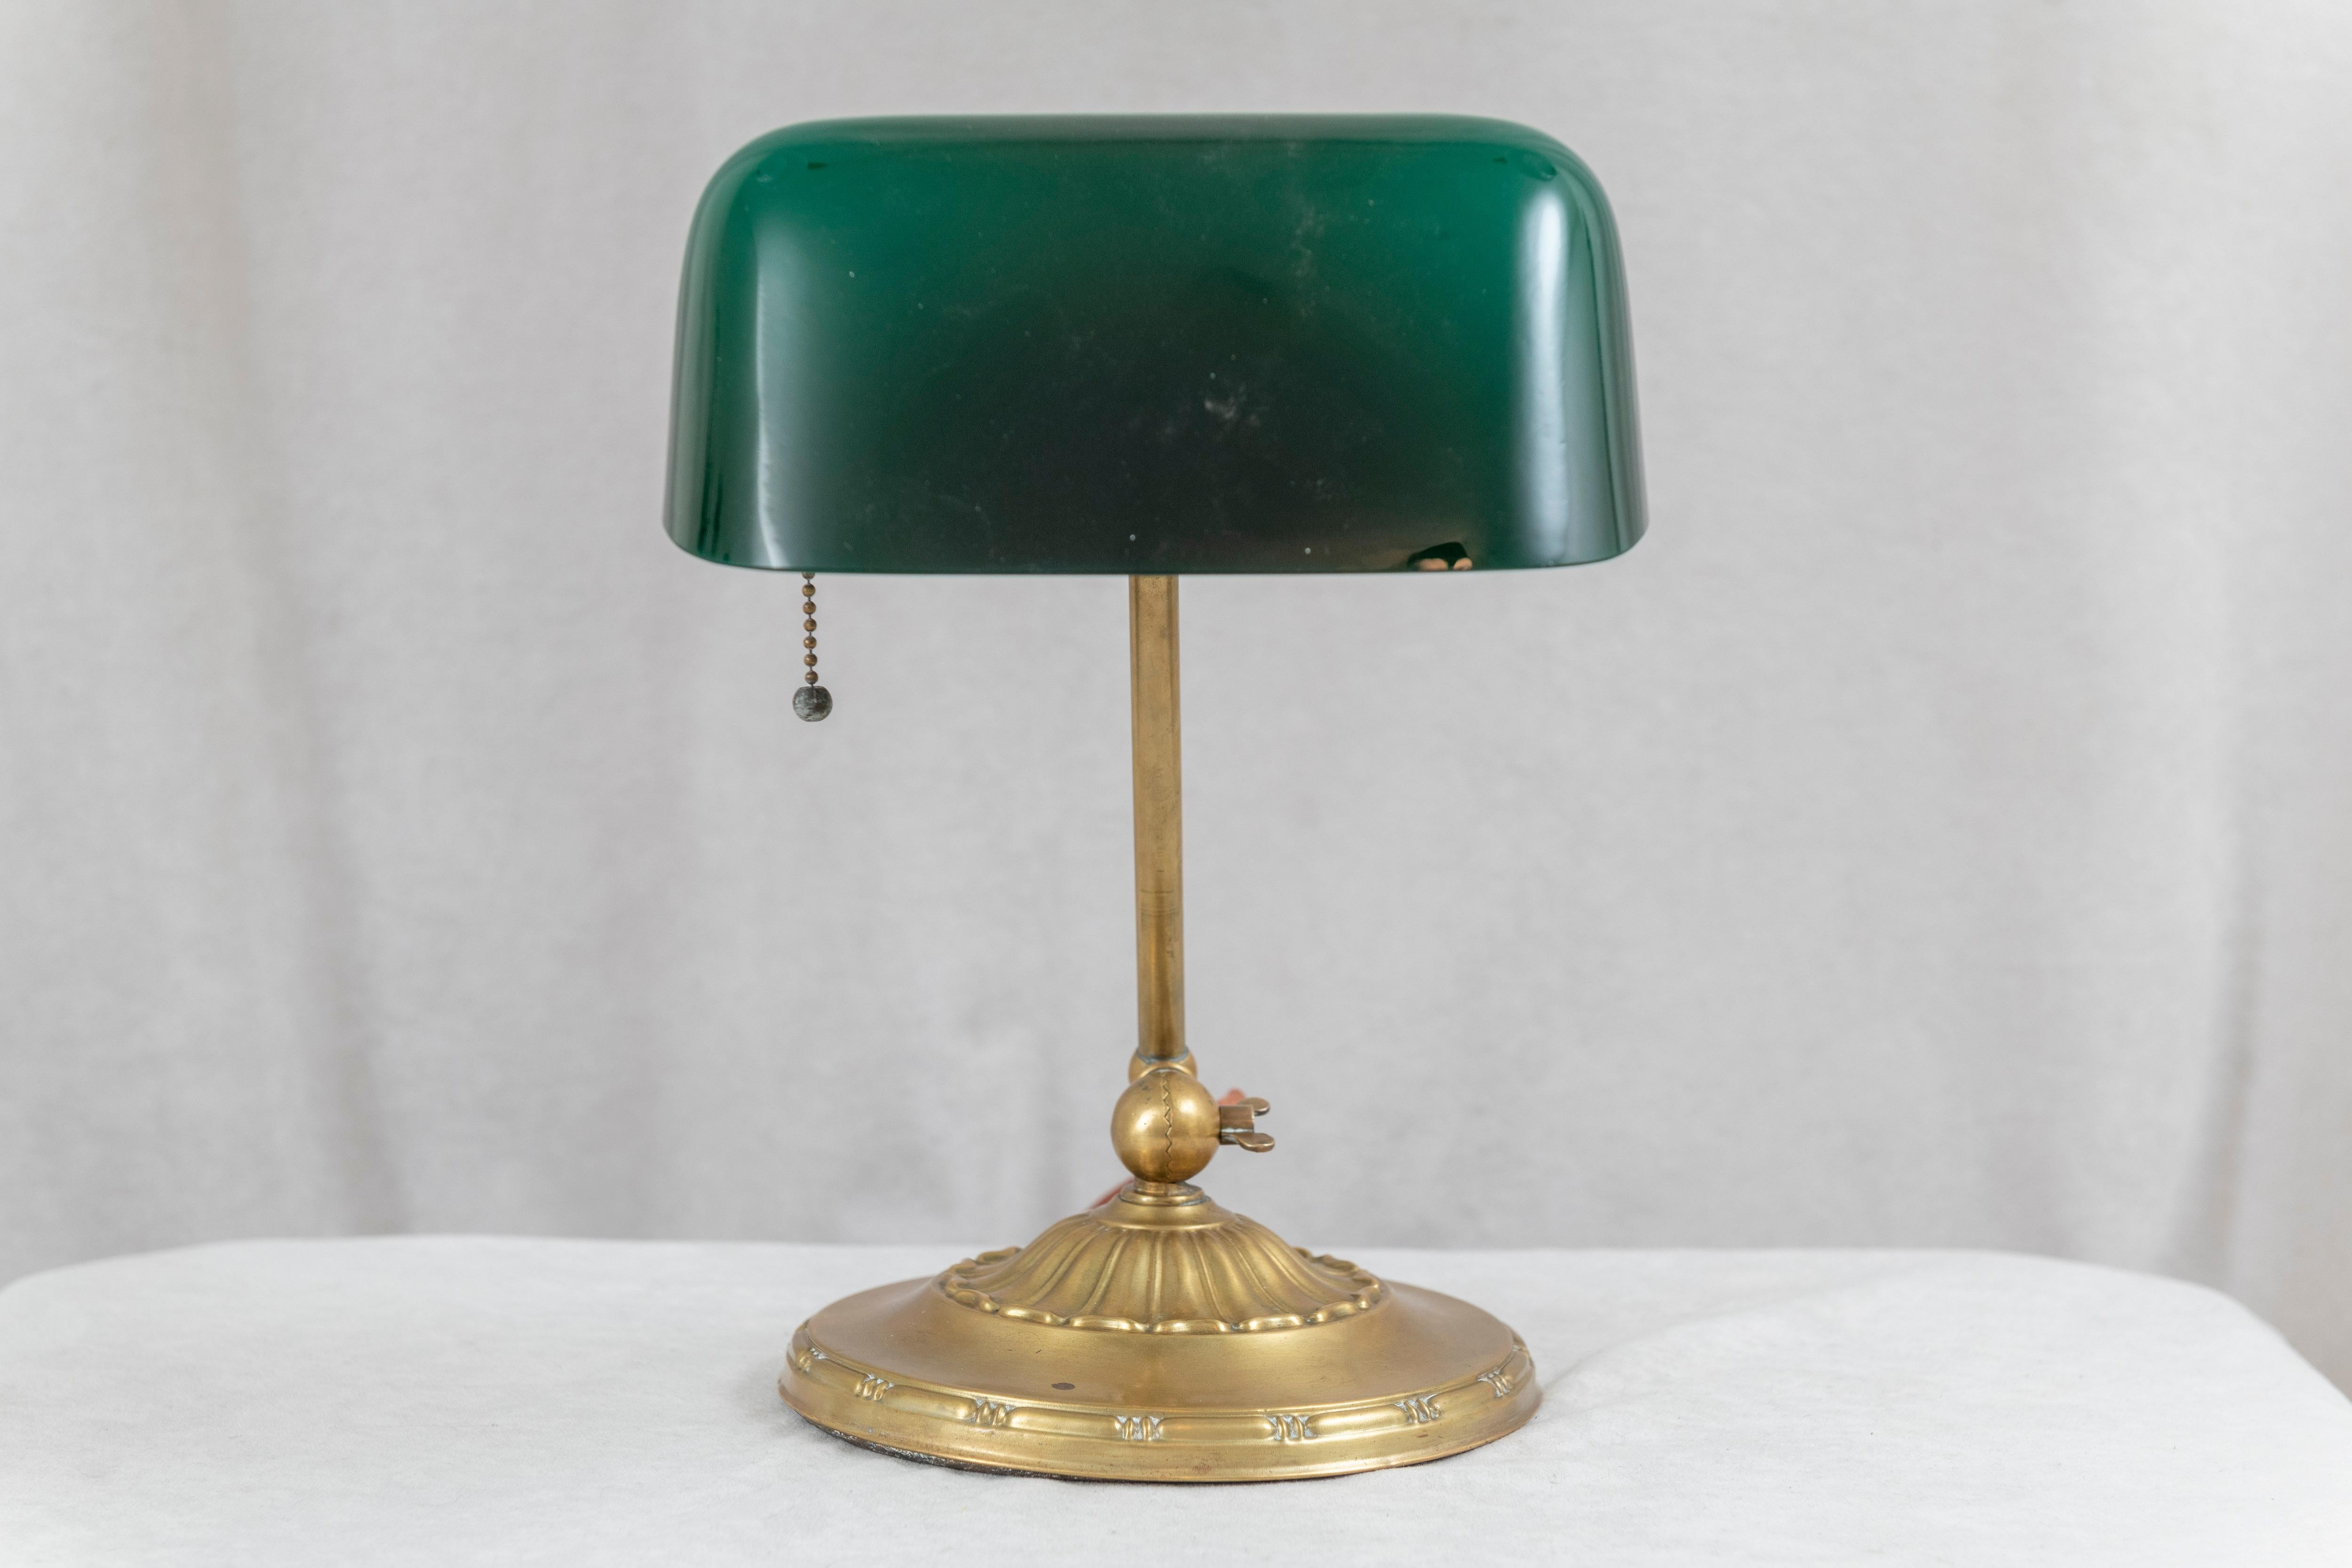 Emeralite Green Shade Banker's Lamp, ca. 1917 For Sale 1